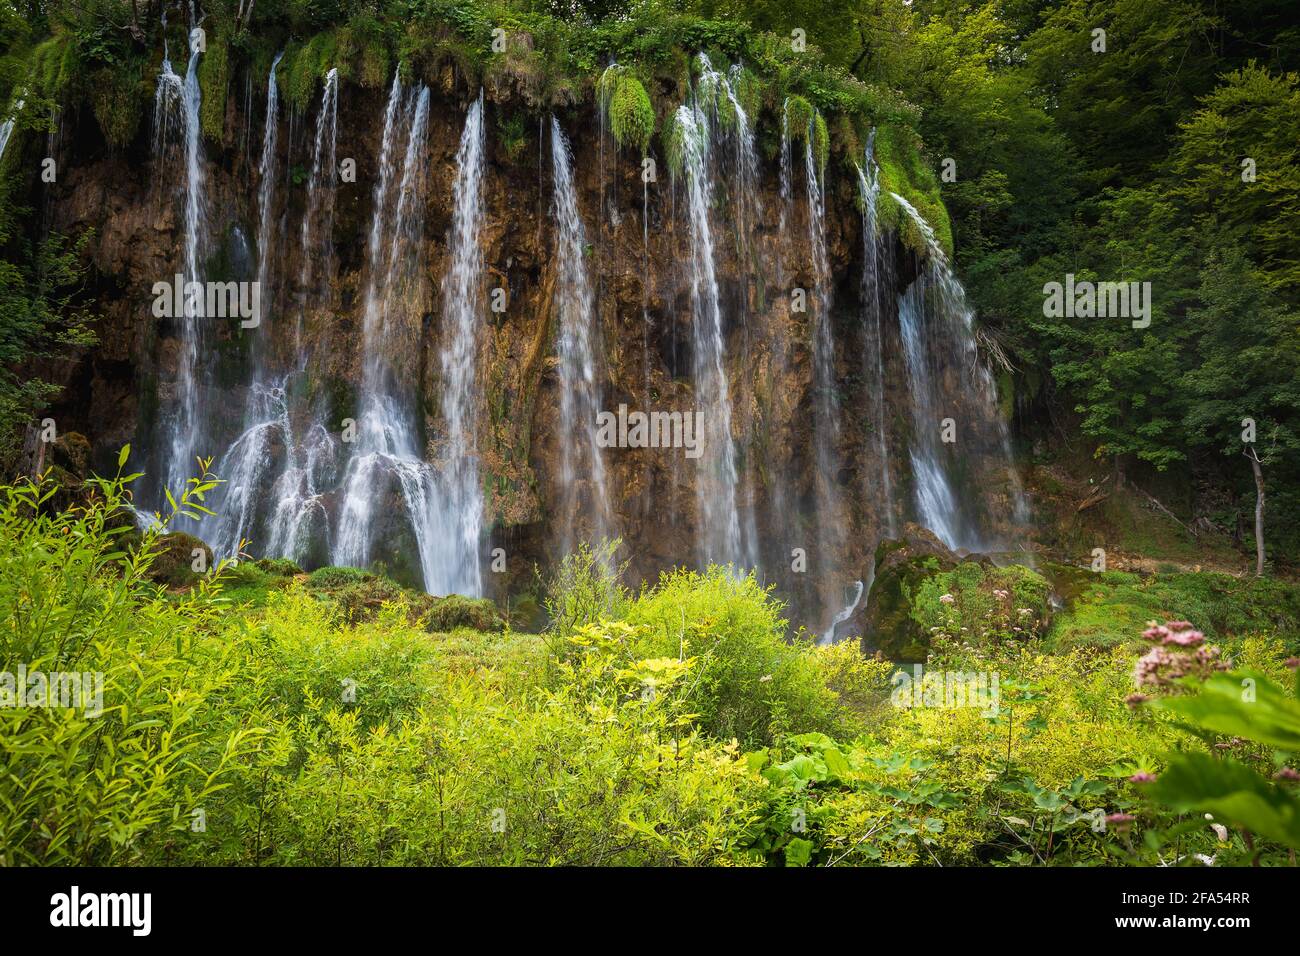 Cascades and waterfalls in the landscape of Plitvice Lakes, Croatia. Stock Photo